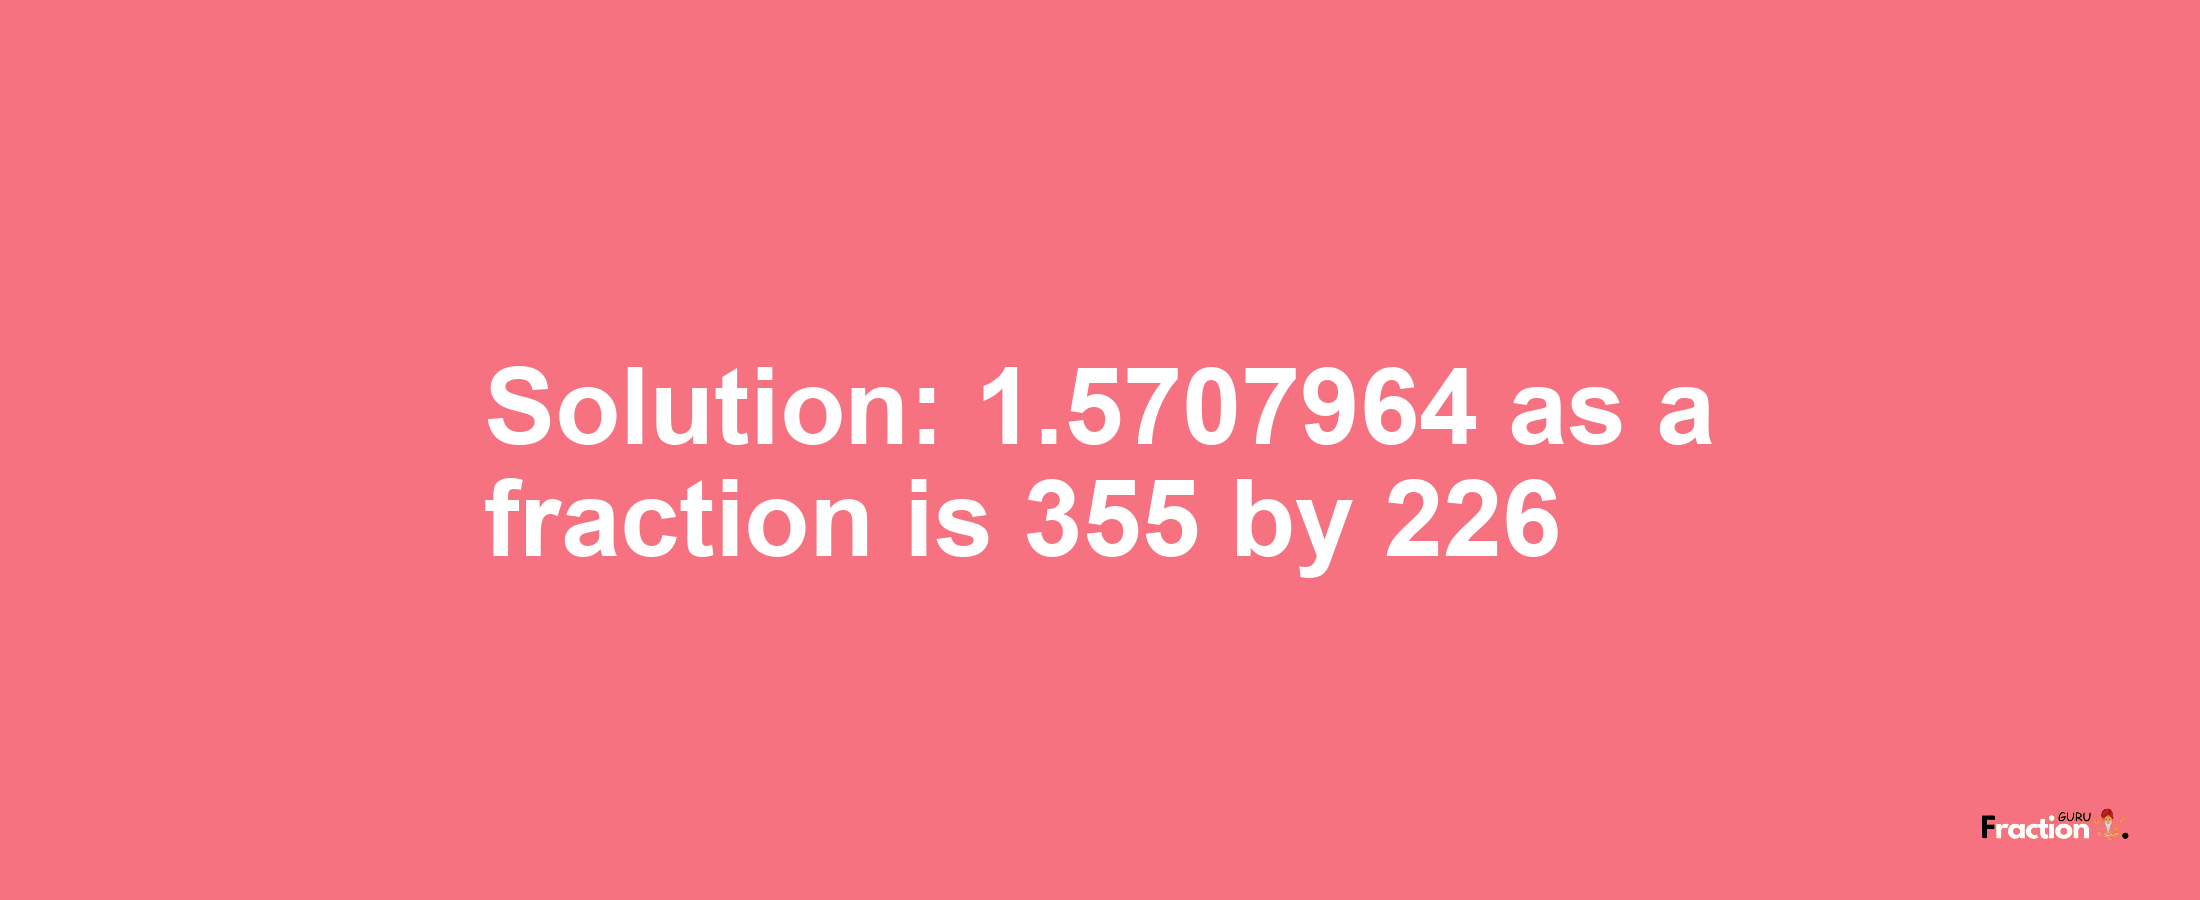 Solution:1.5707964 as a fraction is 355/226